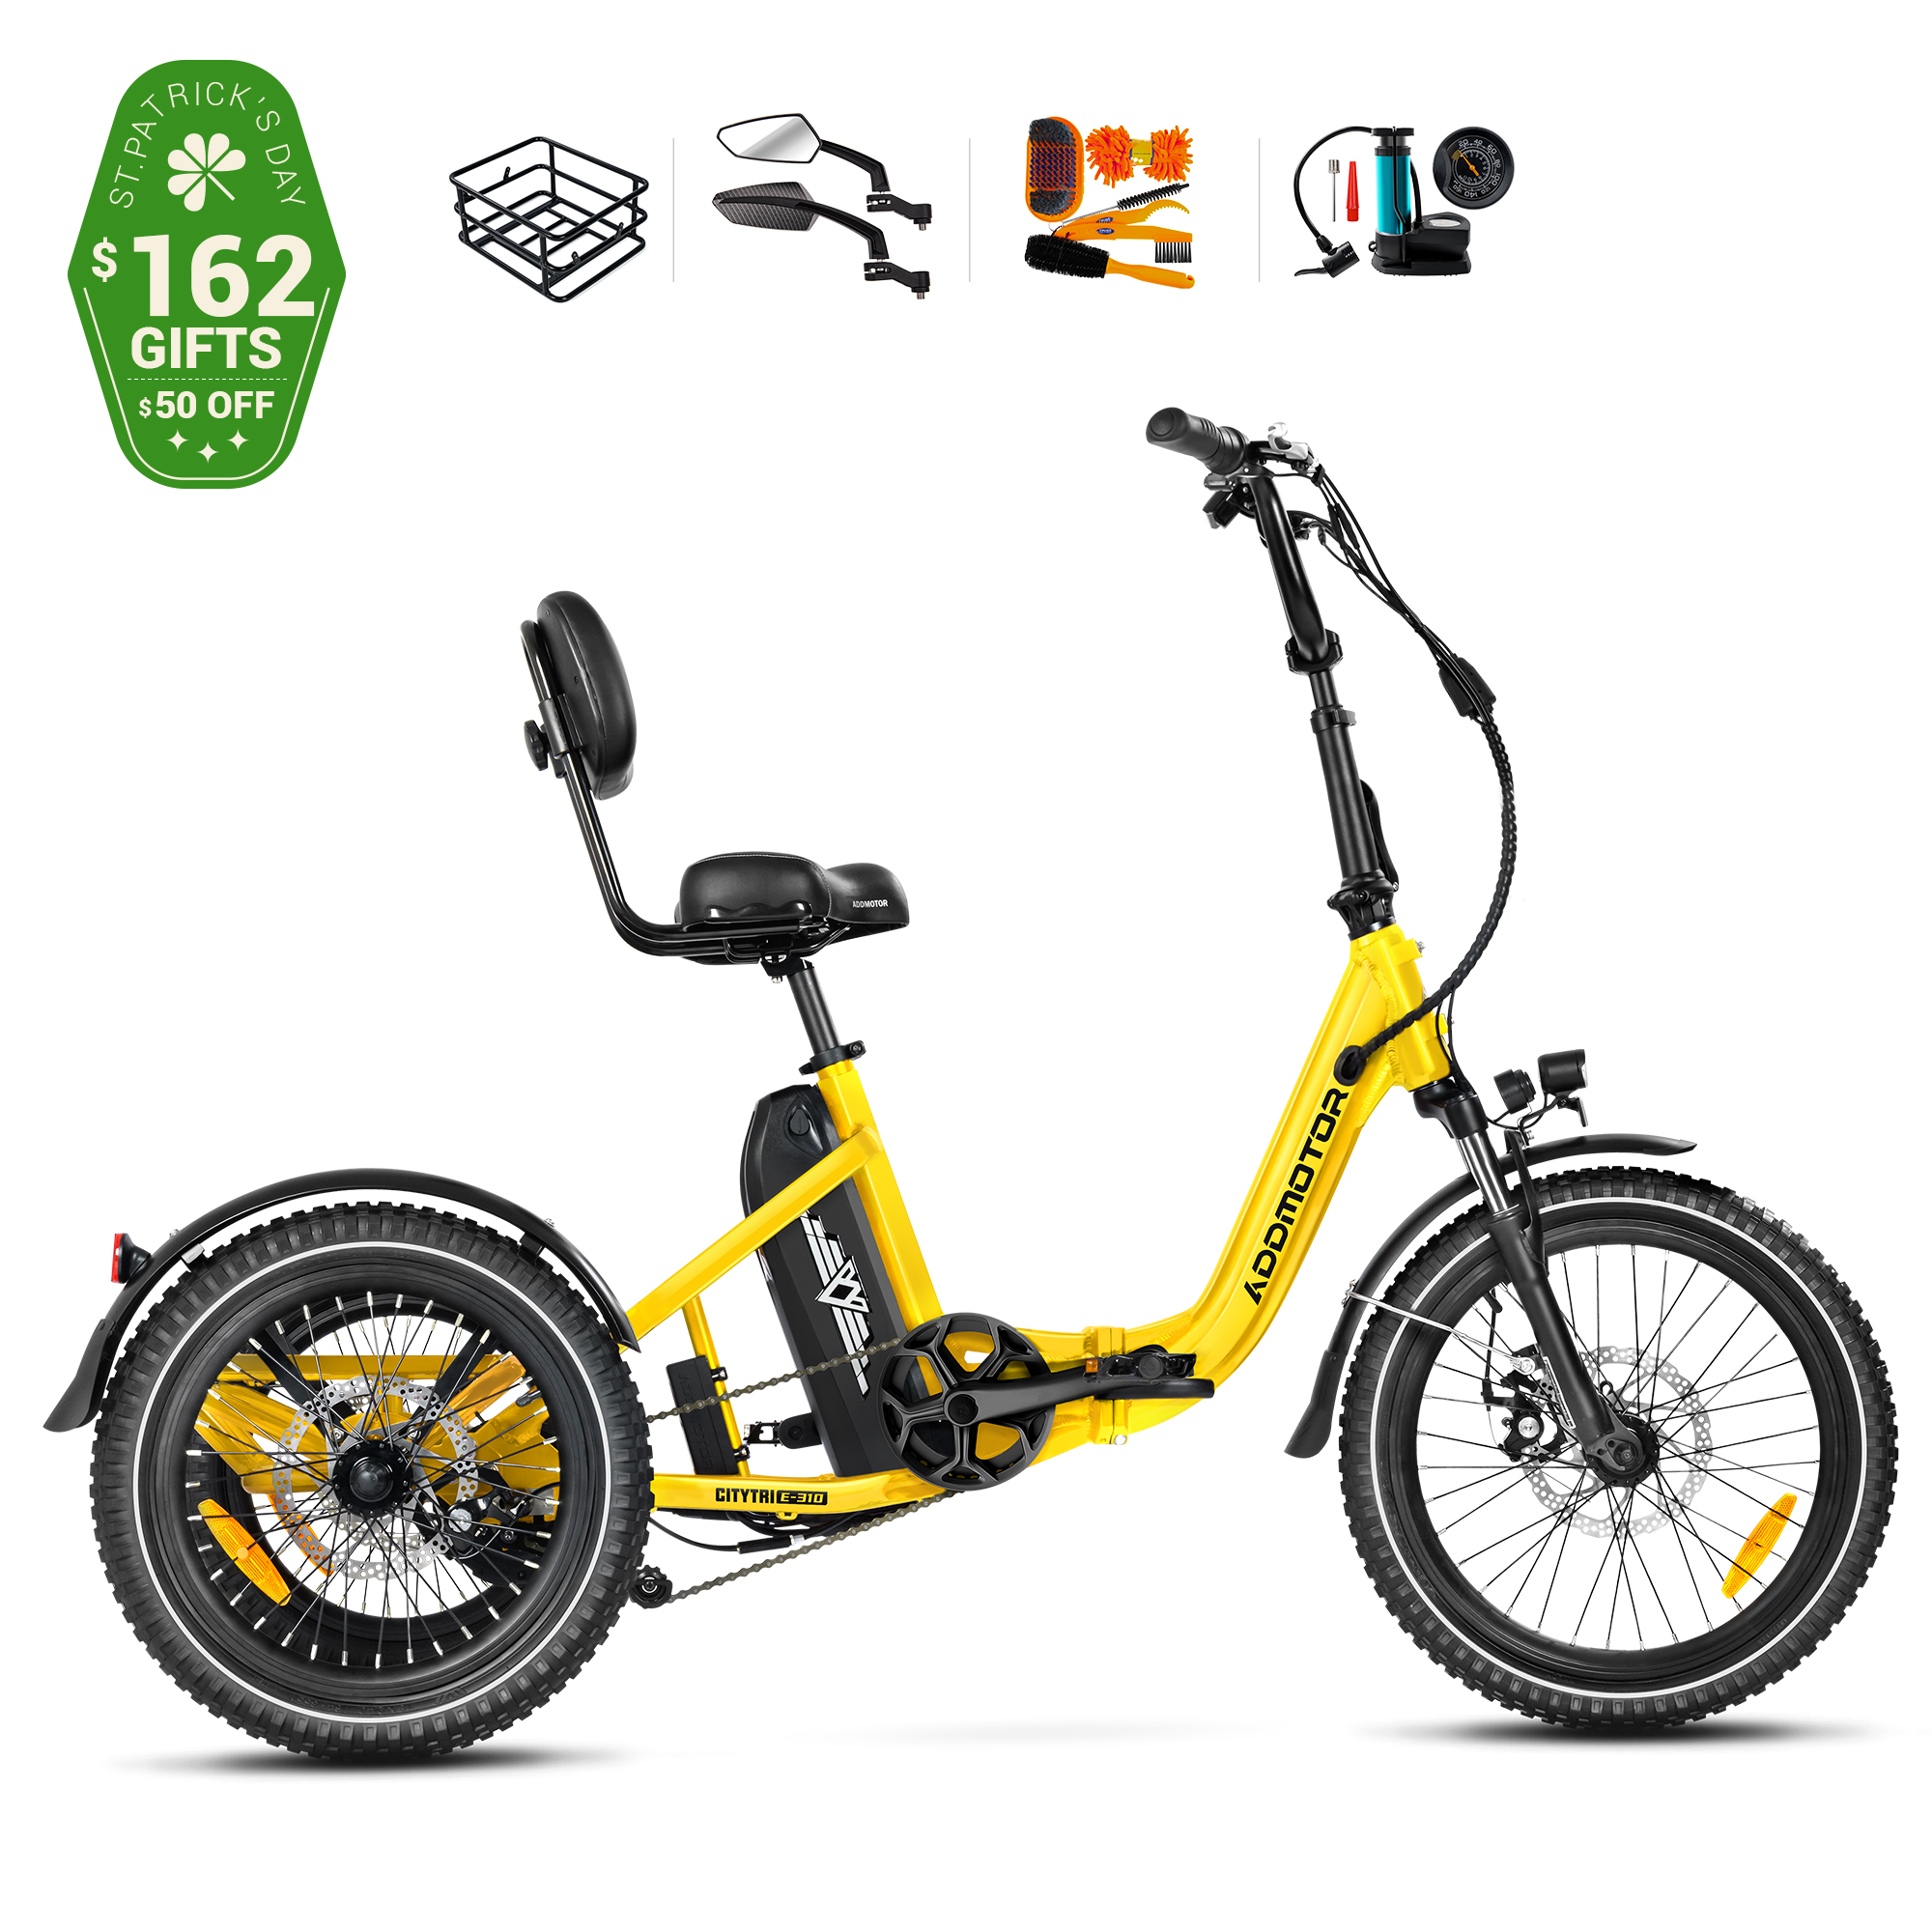 CITYTRI E-310 PLUS Electric Trike with 4 gifts